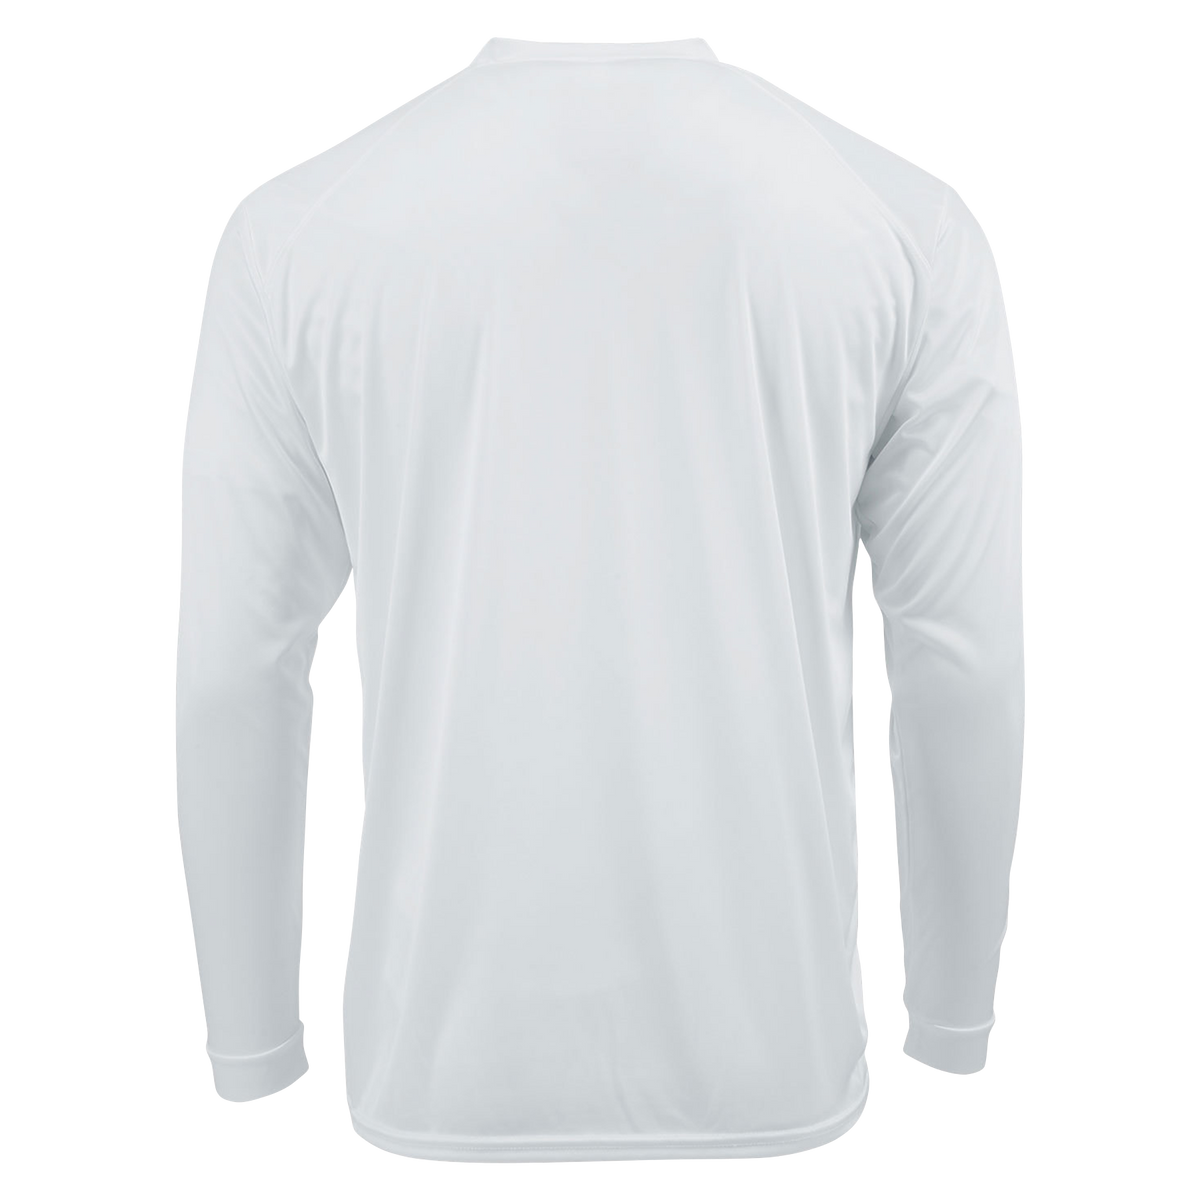 Phase Five Outline 3D SPF Long Sleeve